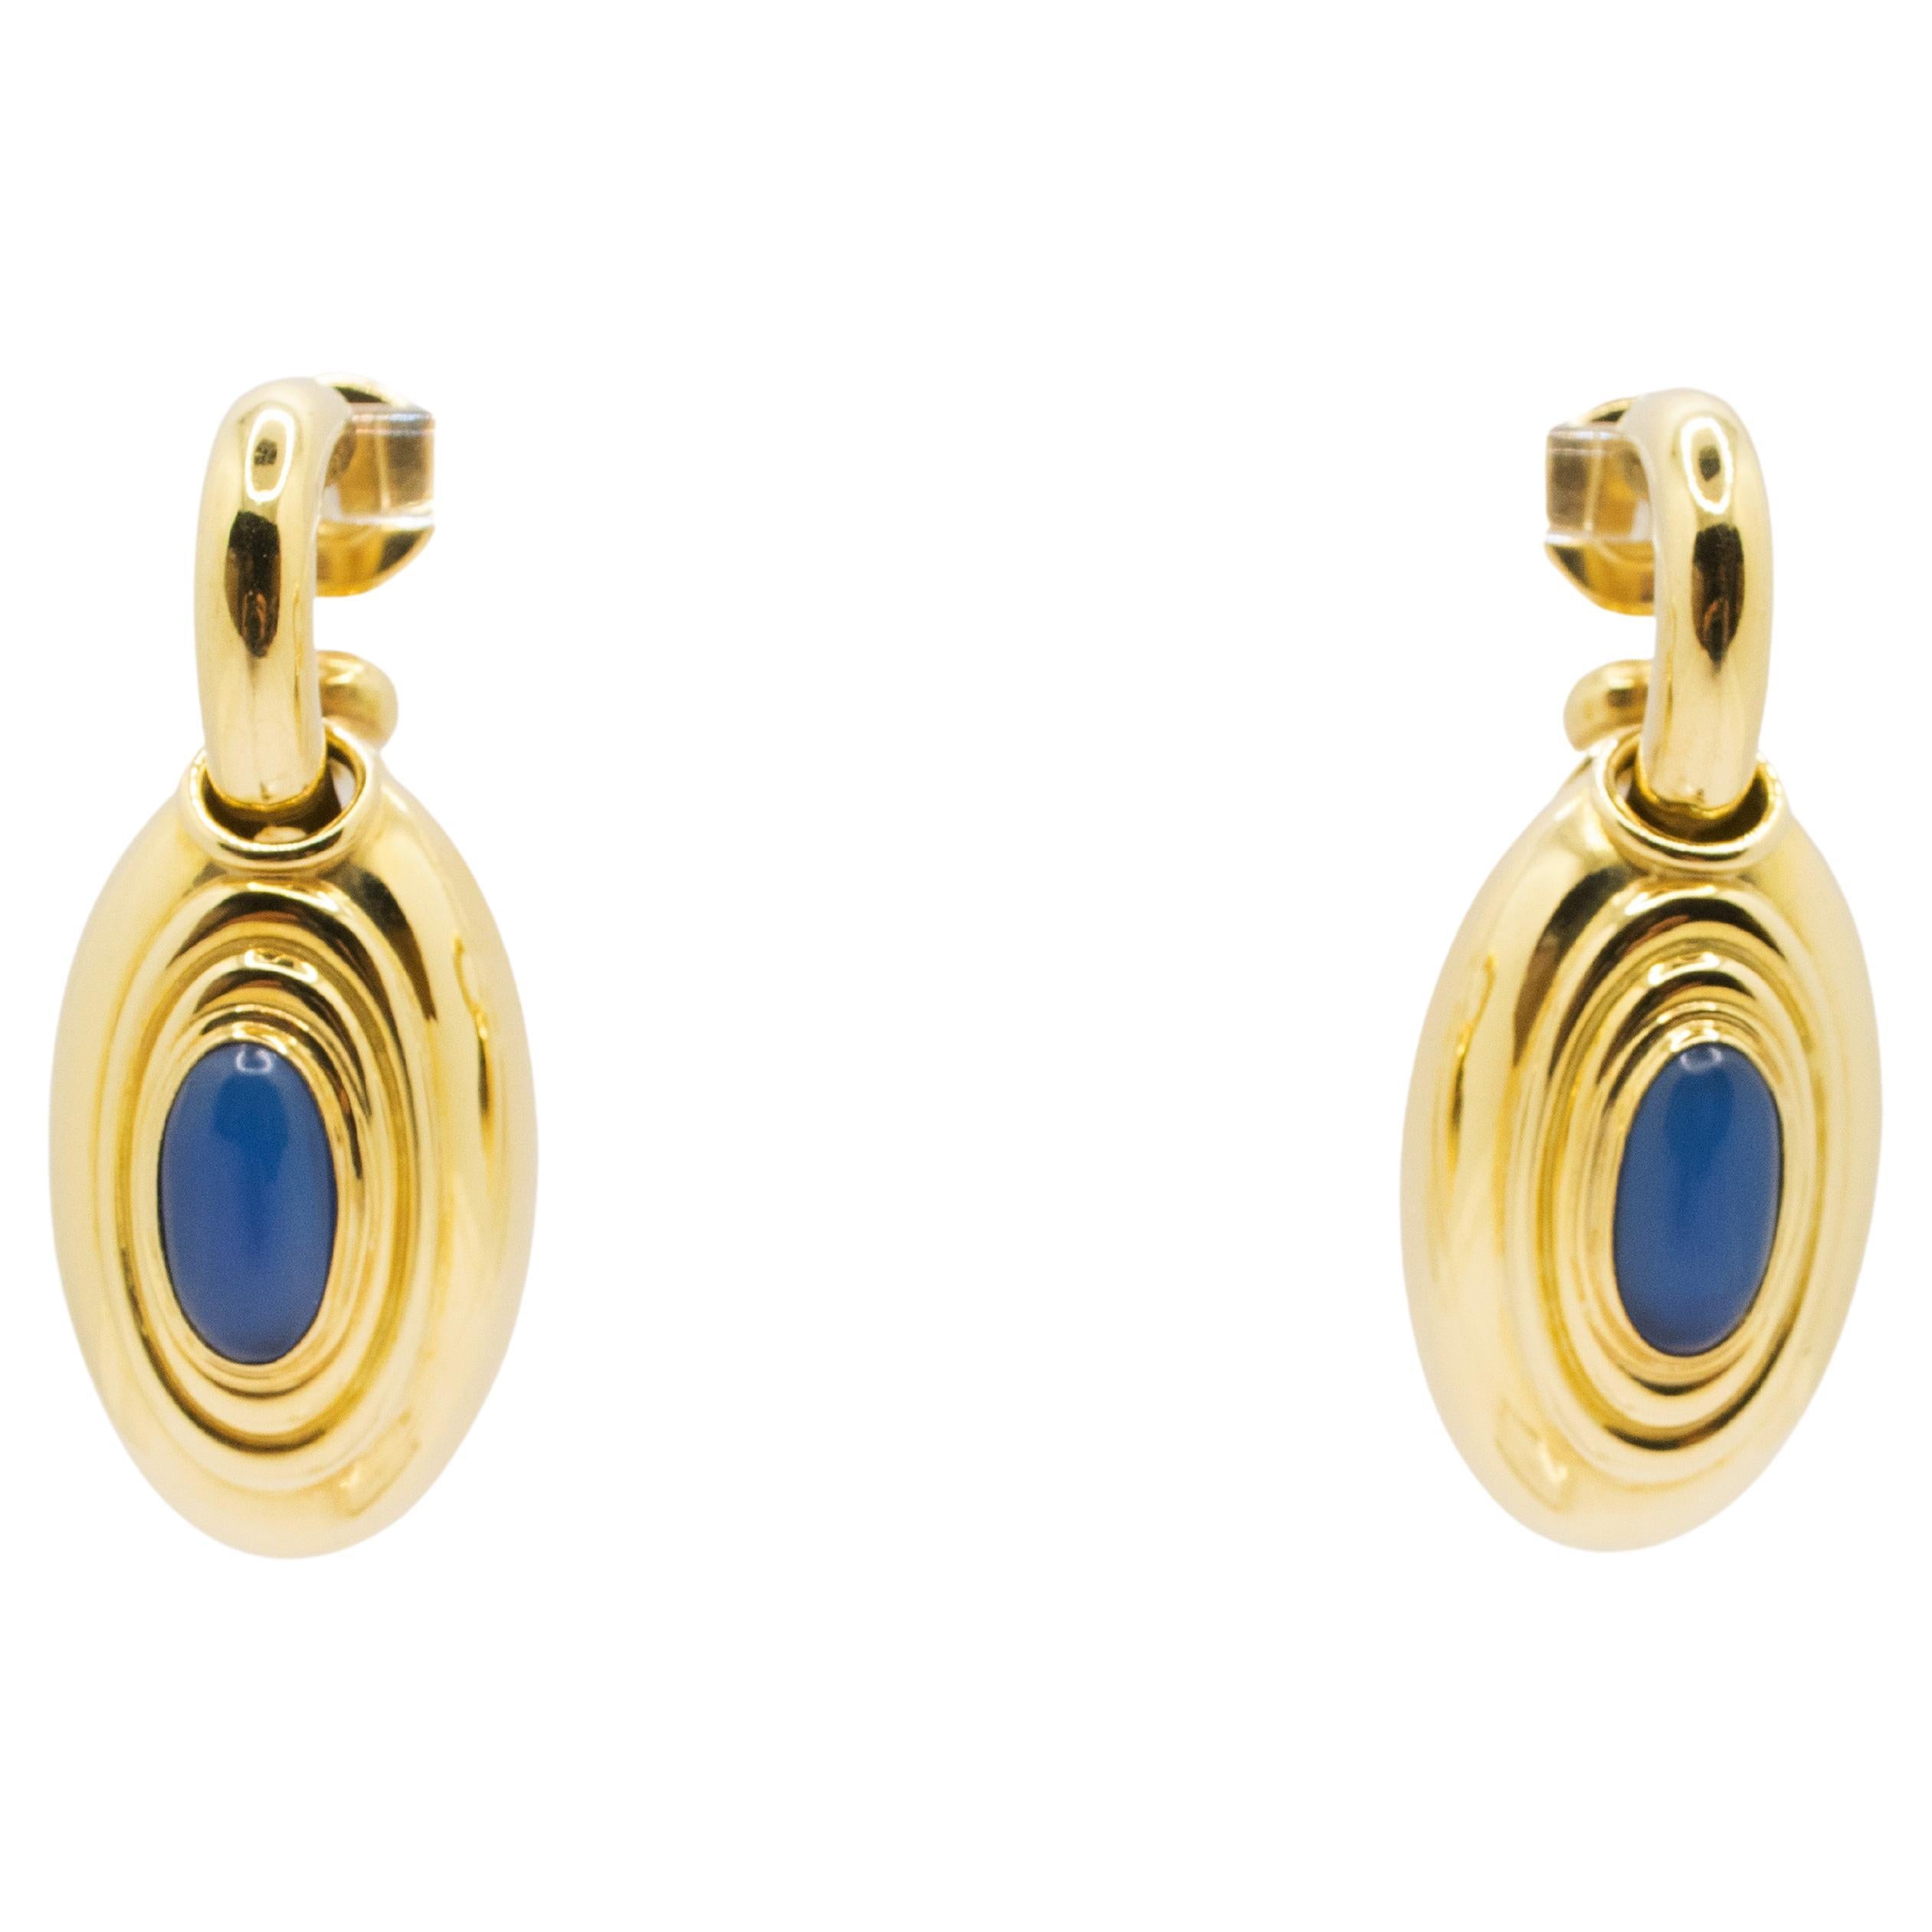 18 Kt Yellow Gold and Blue Agate Earrings